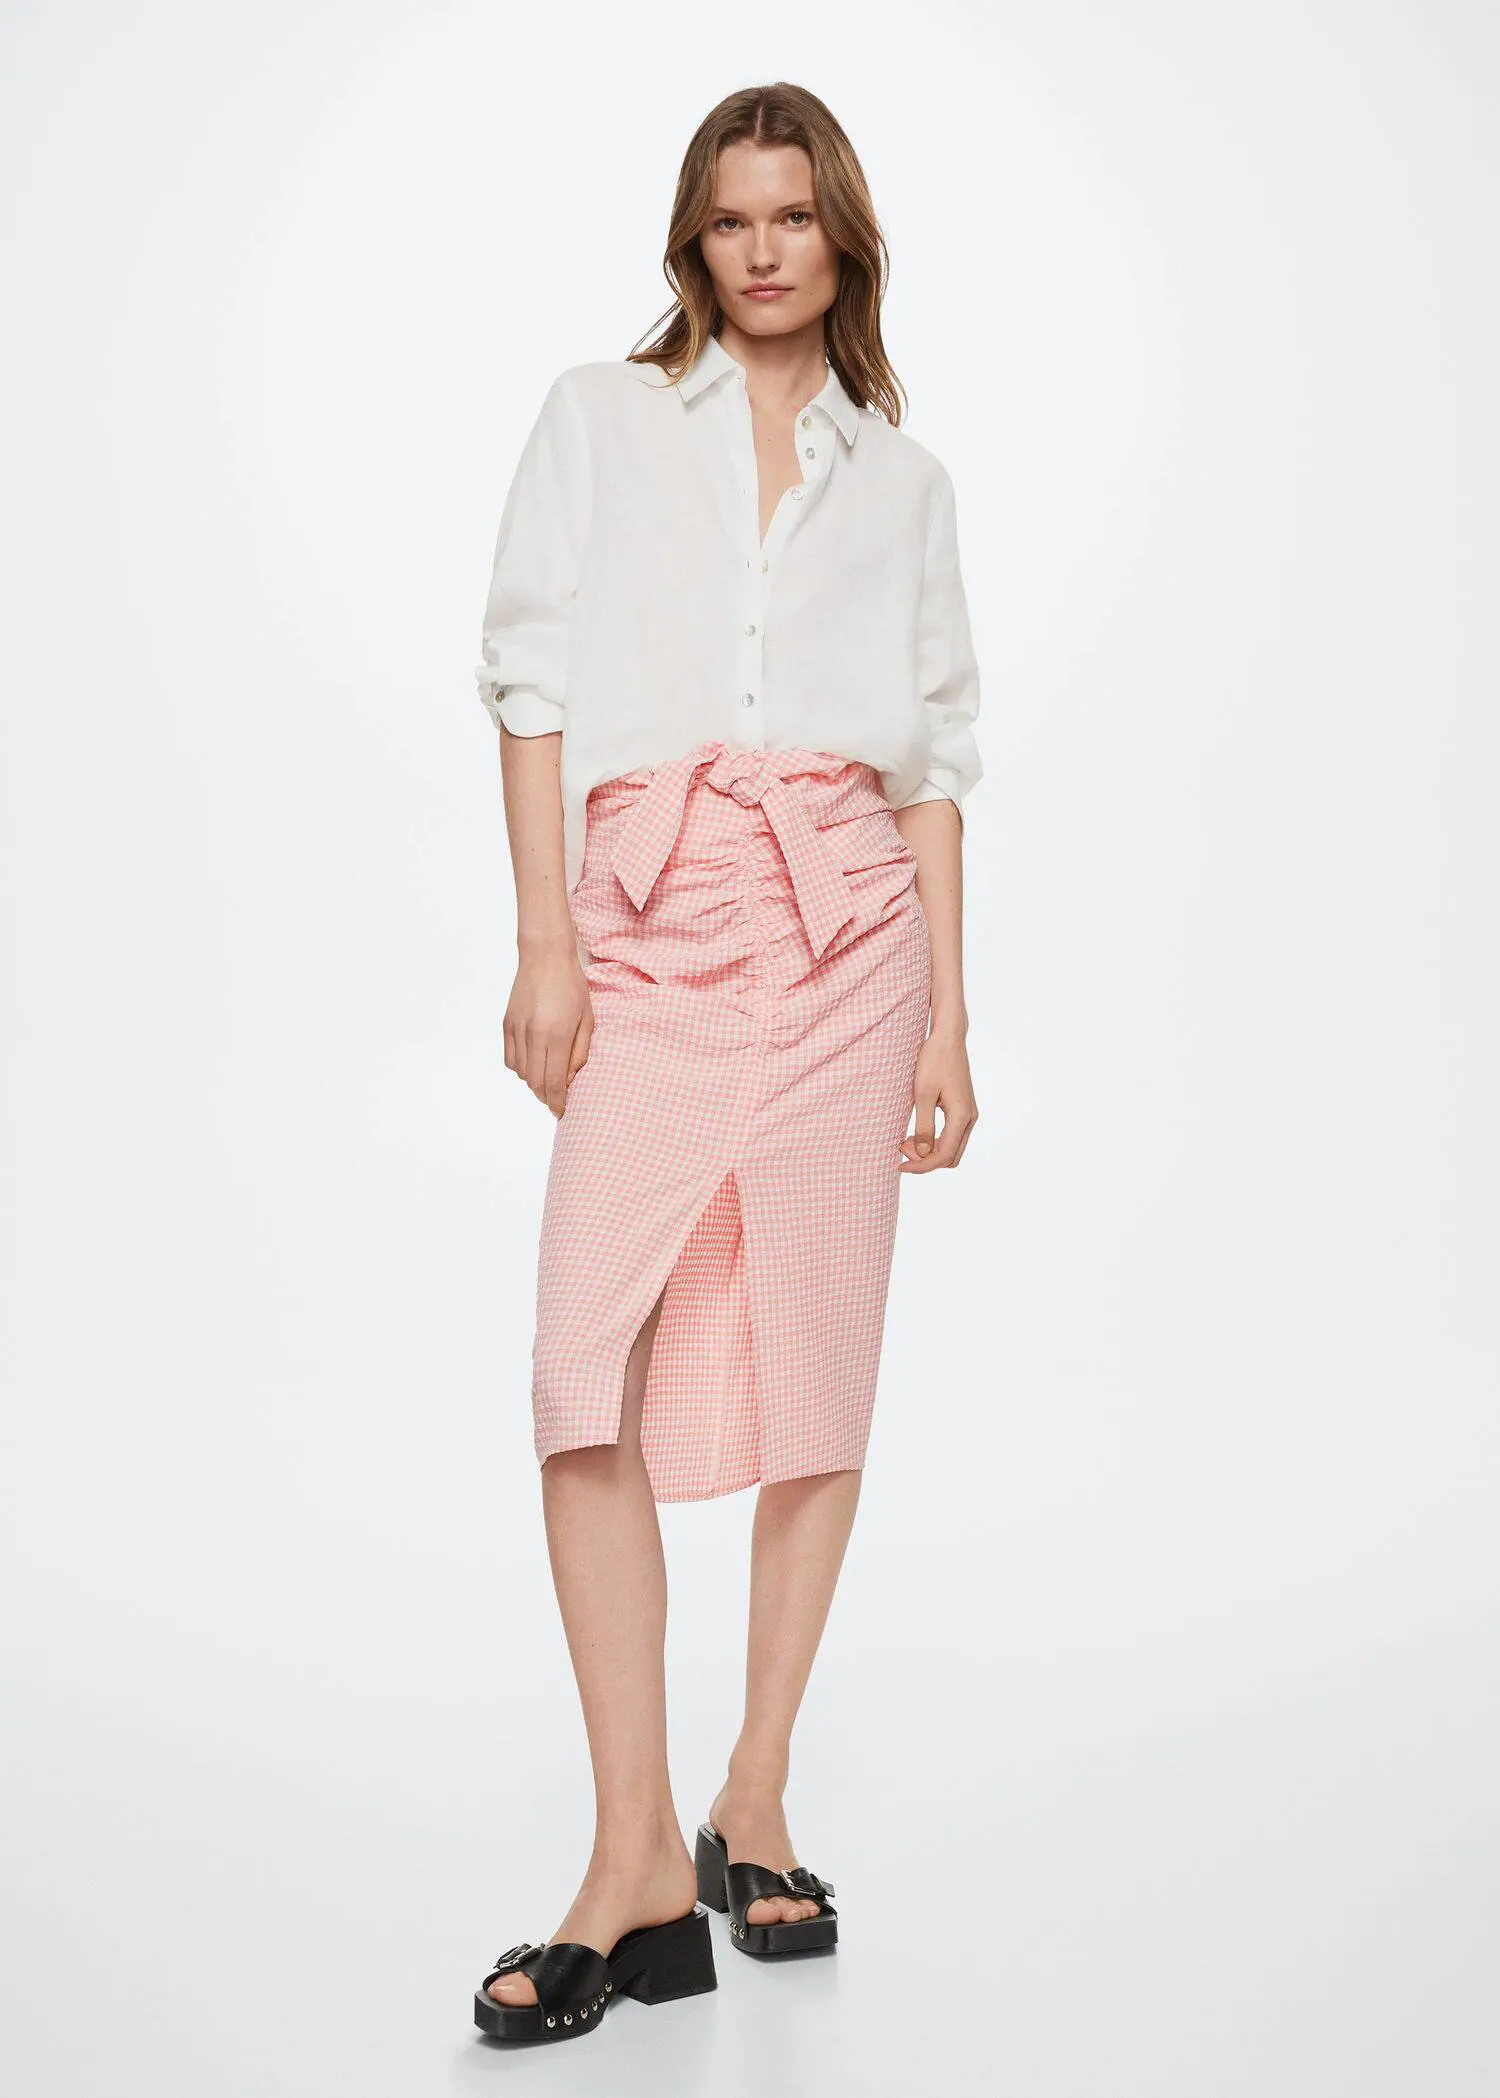 Mango Gingham pleated skirt. a woman wearing a white shirt and a pink skirt. 